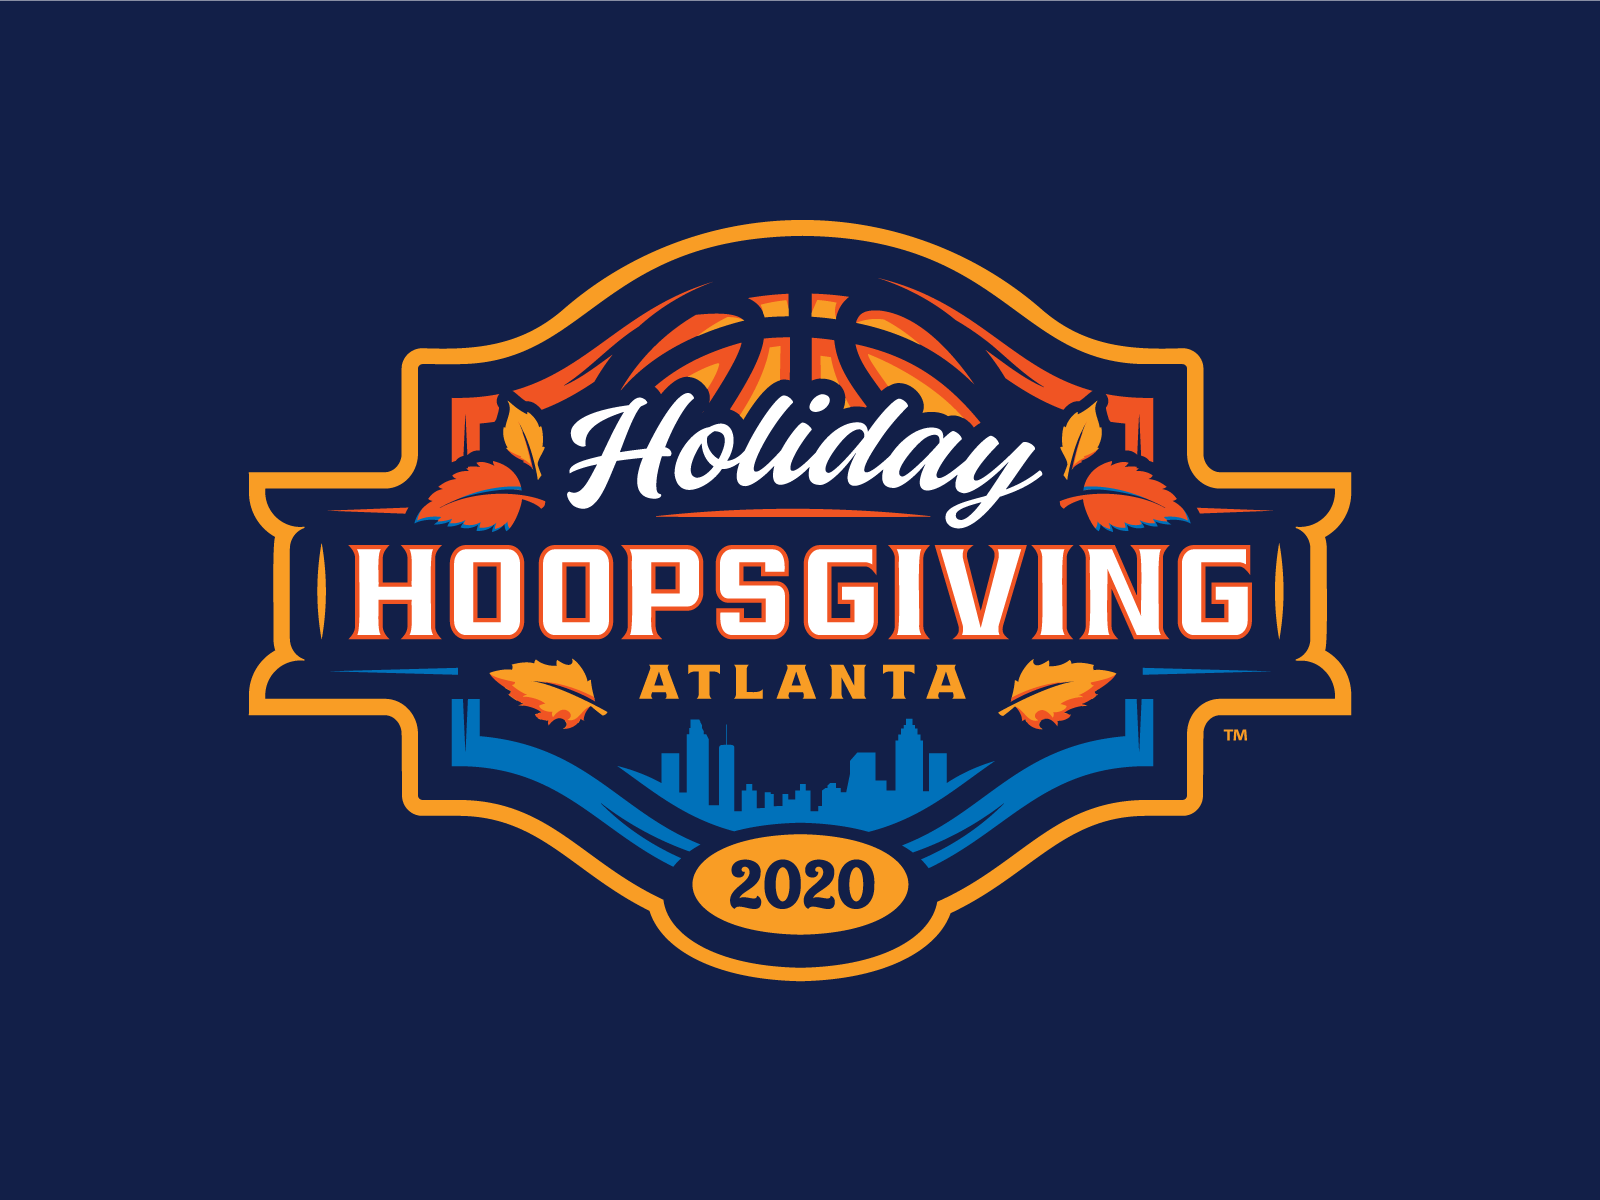 Holiday Hoopsgiving by Harley Creative on Dribbble